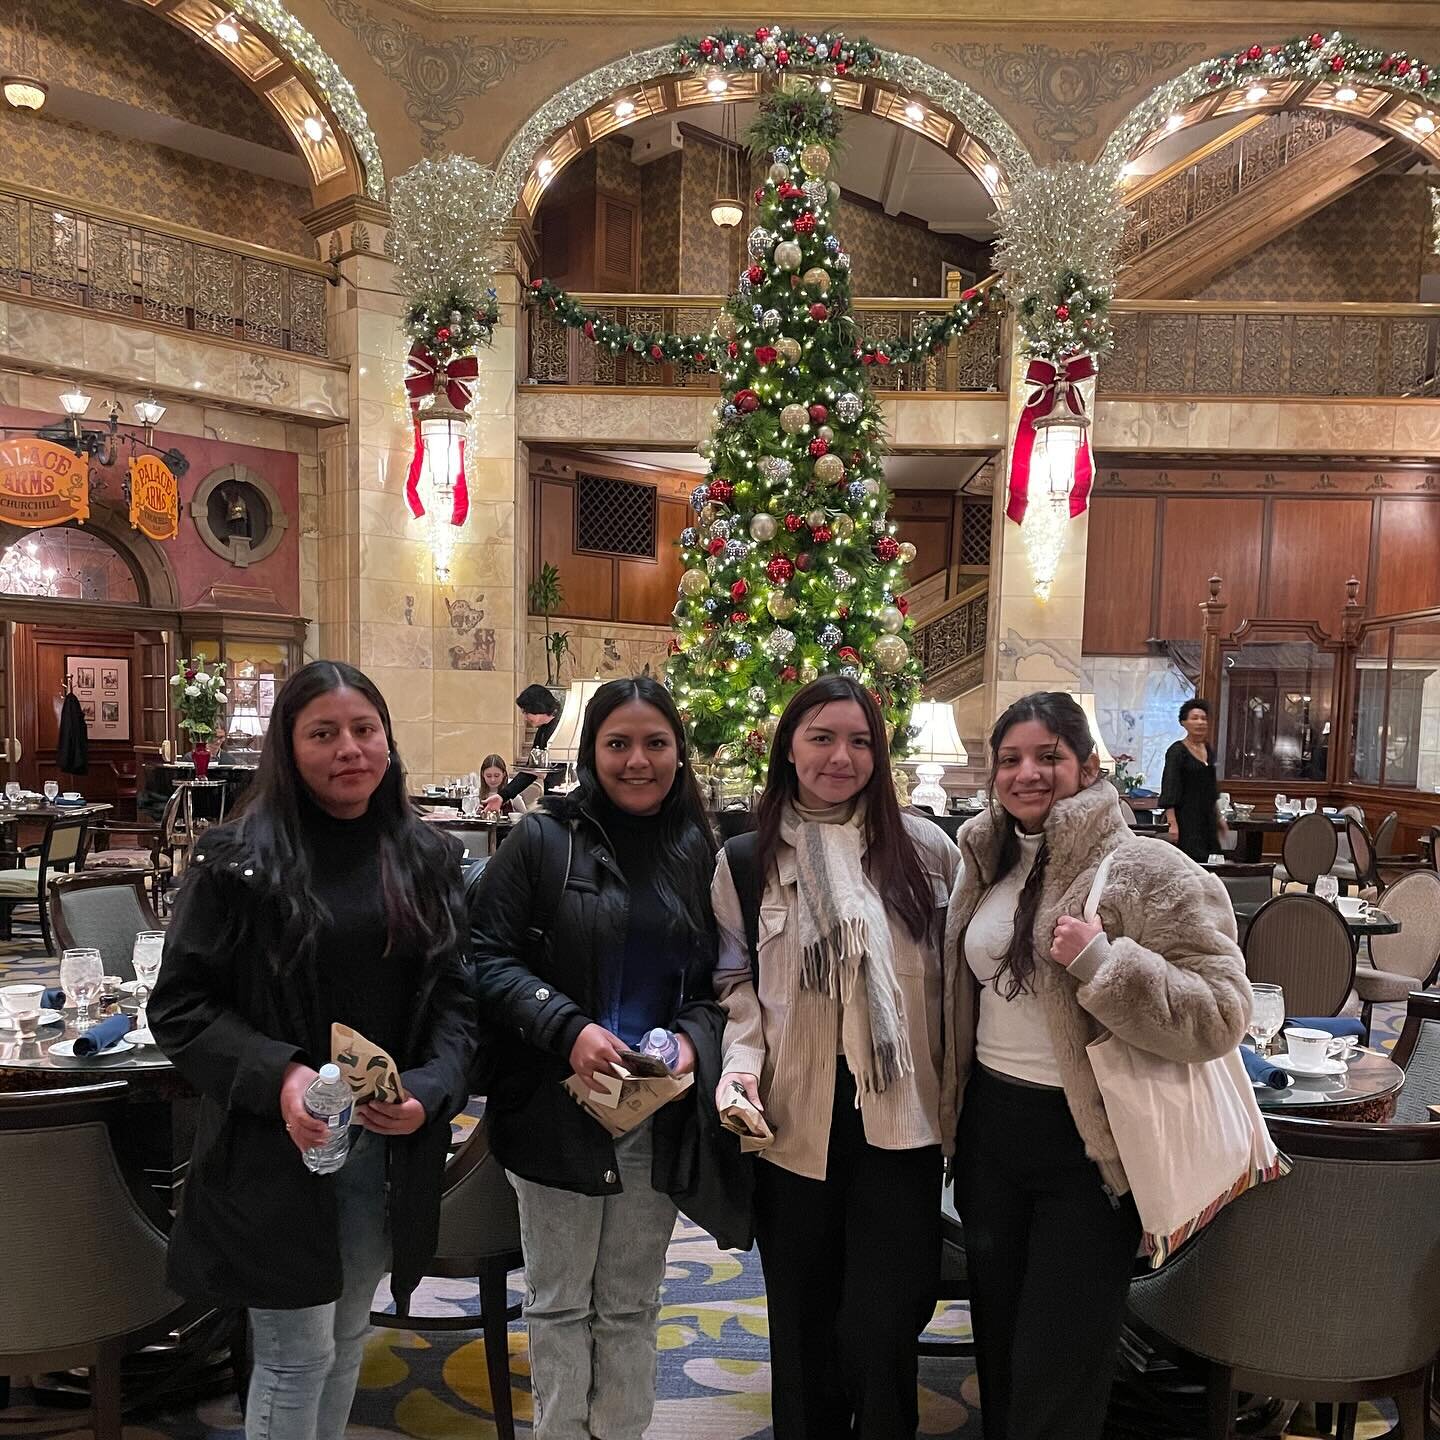 Welcoming our Peruvian Work &amp; Travel participants to their new employer, the historic Brown Palace Hotel in Denver, CO!